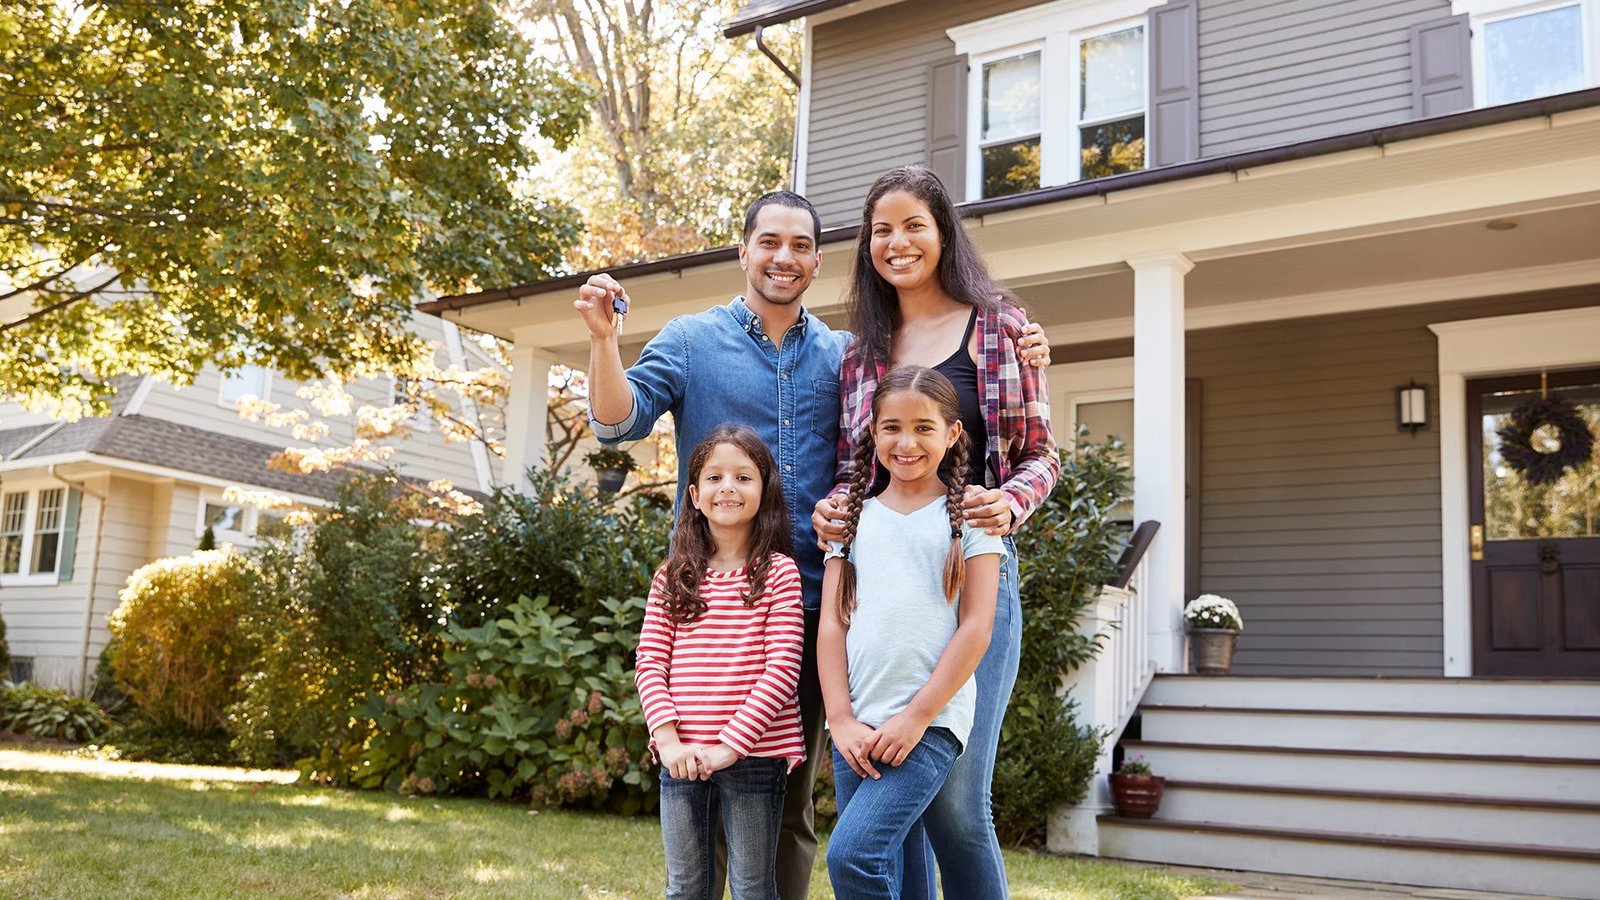 A family of four posing in front of house indicating home ownership